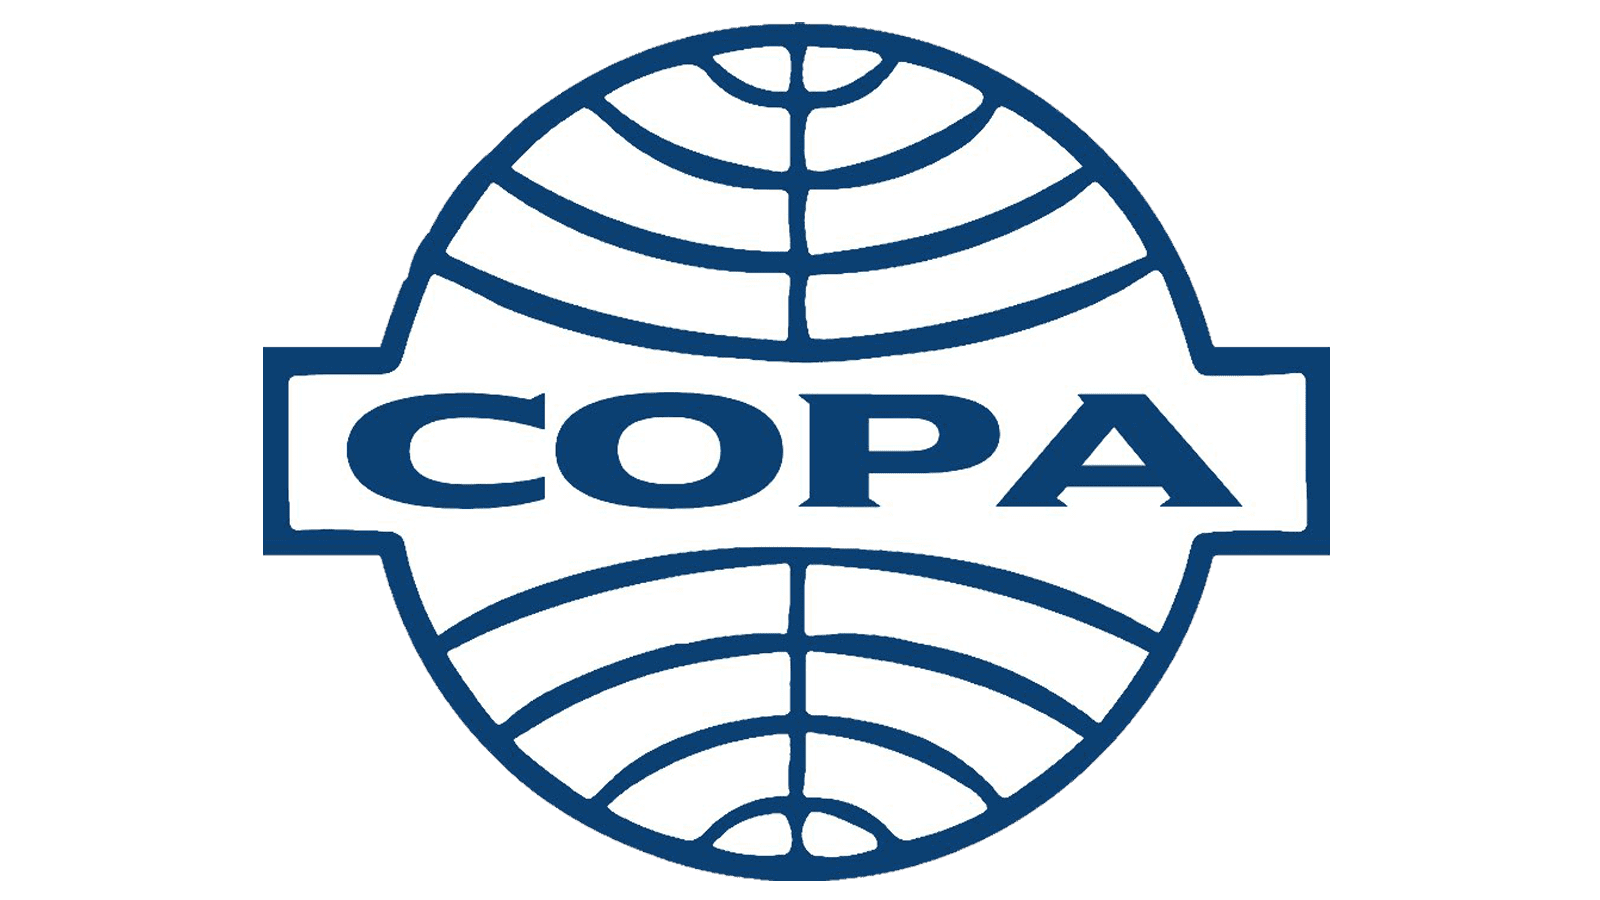 Copa Airlines - Simple English Wikipedia, the free encyclopedia